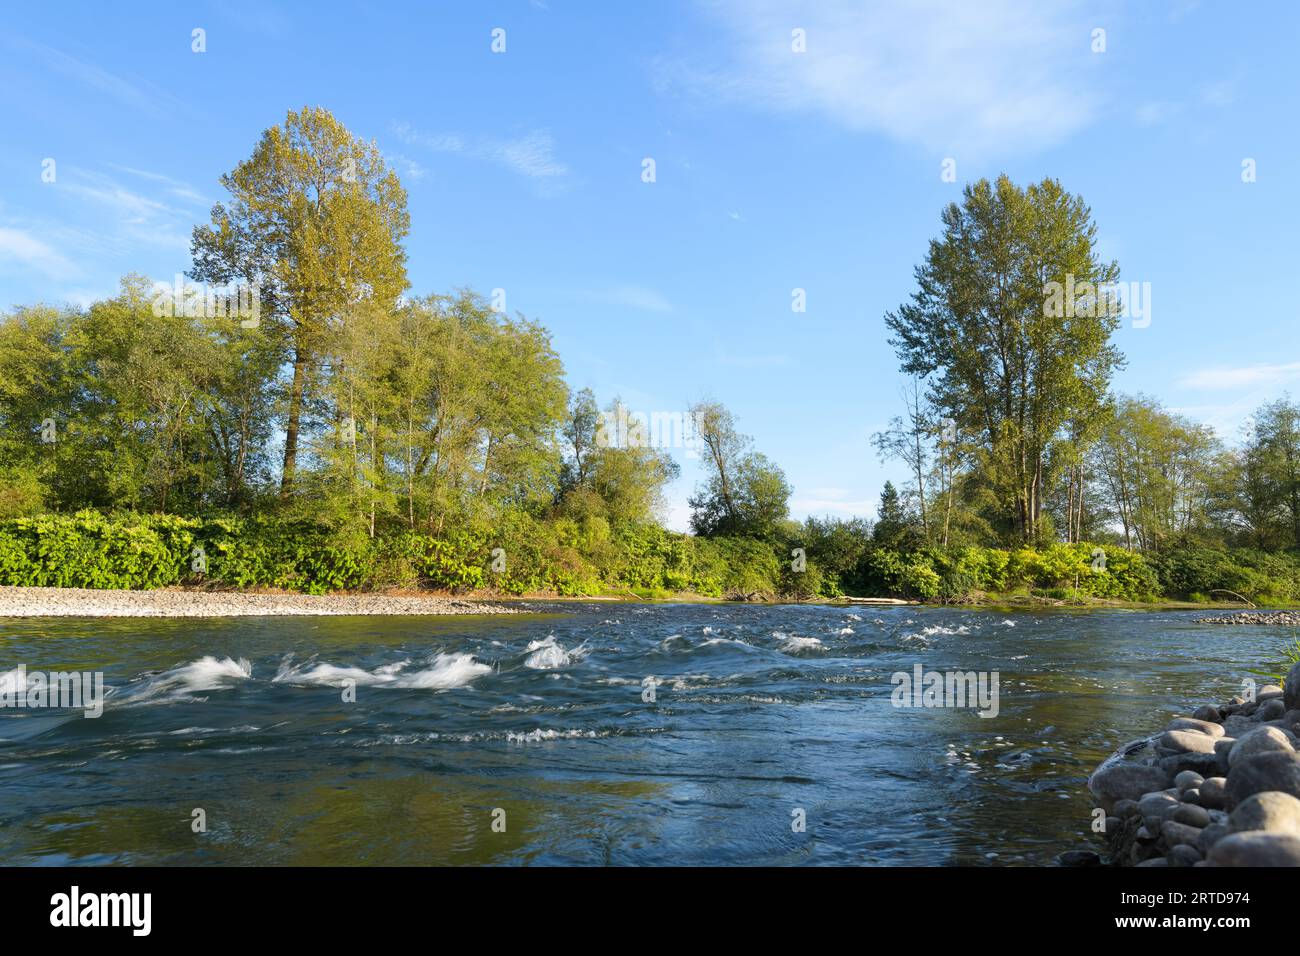 Snoqualmie River passing lush river bank with white crests on water in fall Stock Photo